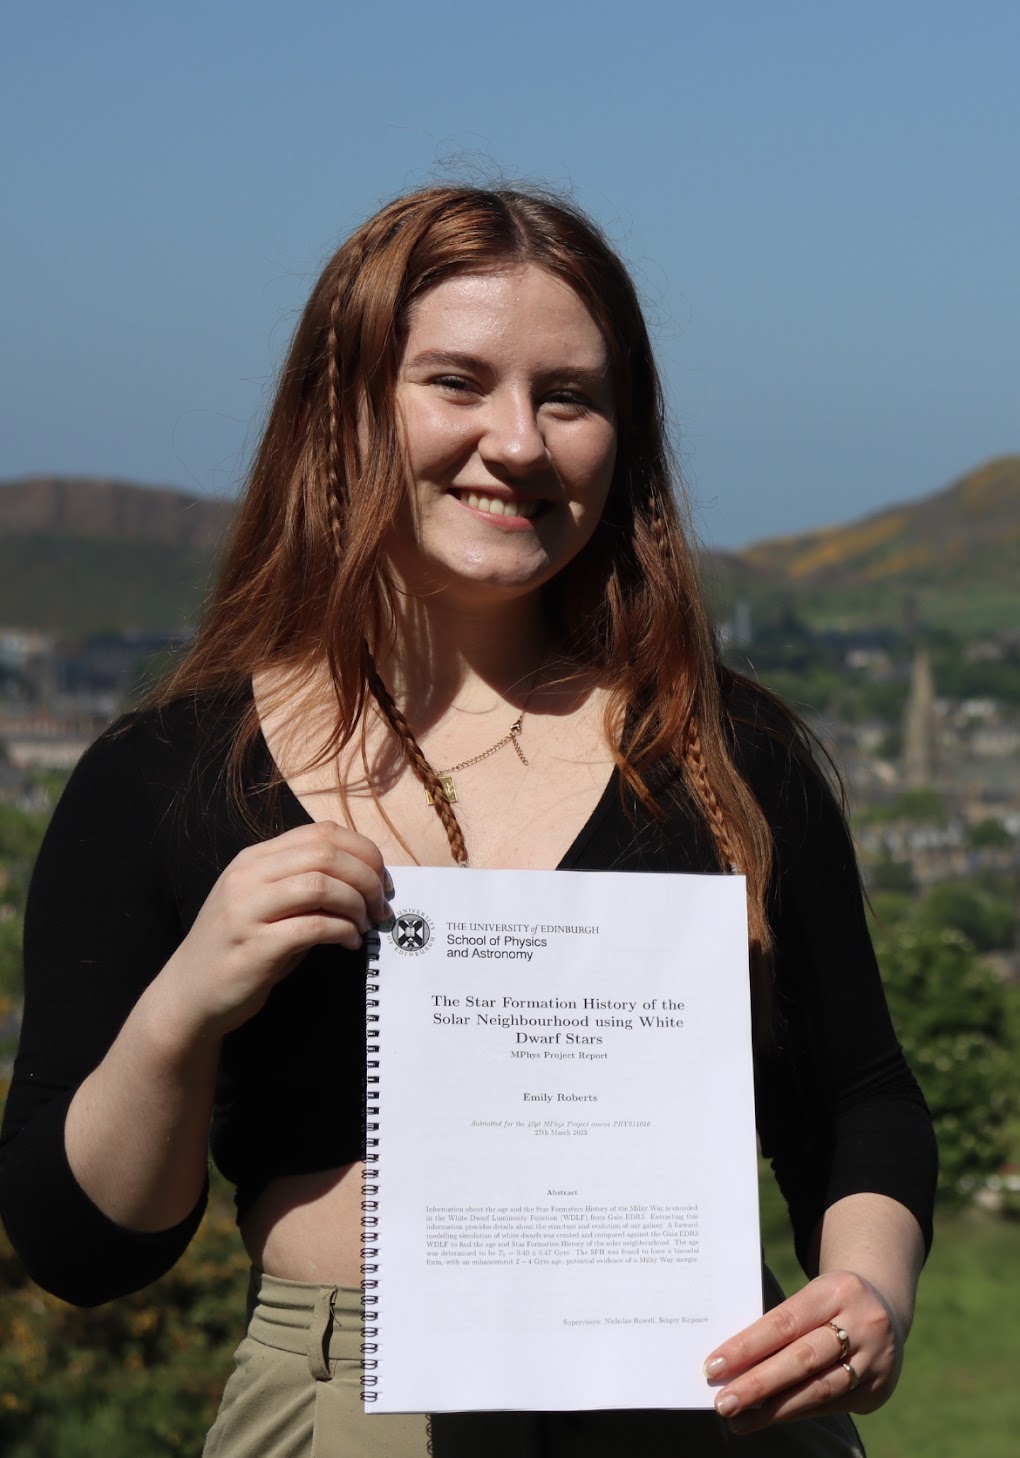 Emily (a twenty four year old woman with long red hair) is smiling while holding her dissertation. She is wearing a black top and pale green trousers.